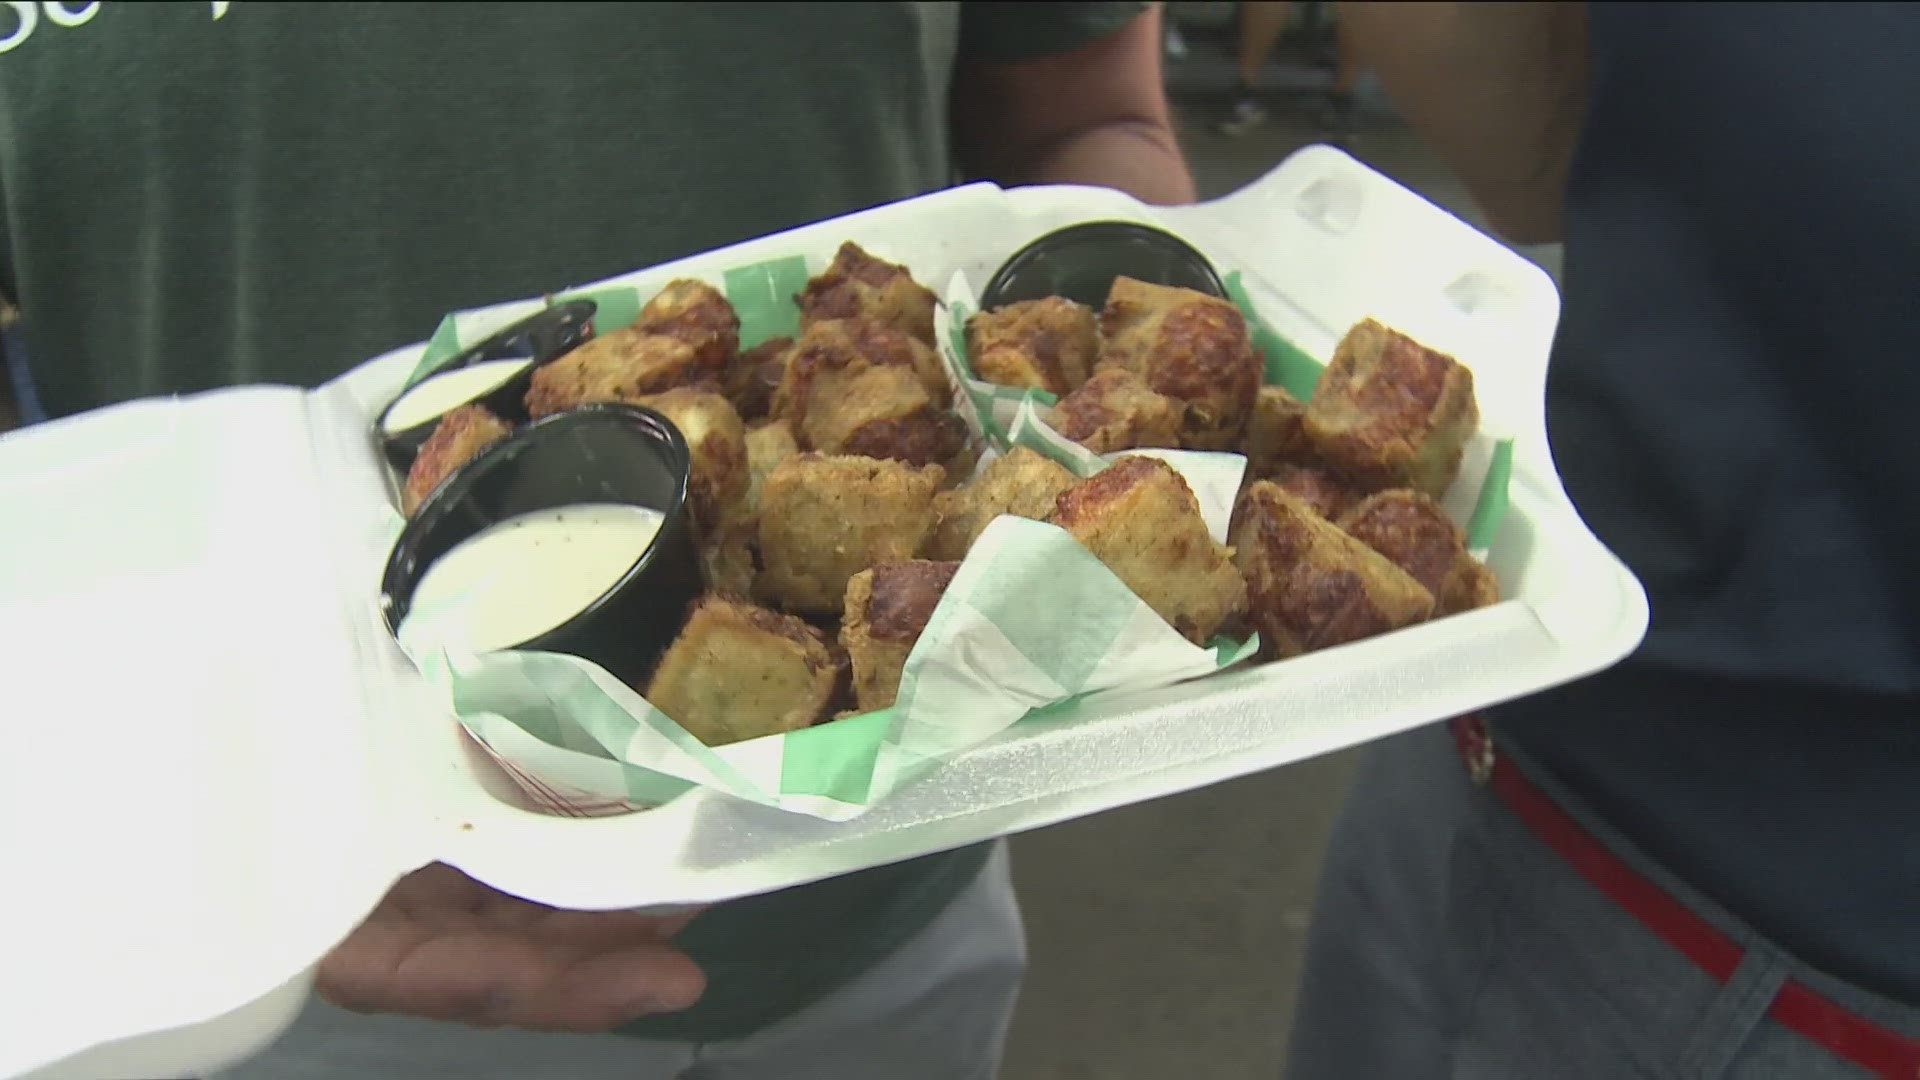 Dan O'Gara brought some Dill-iscious Grilled Cheese Bites to the KARE 11 Barn.